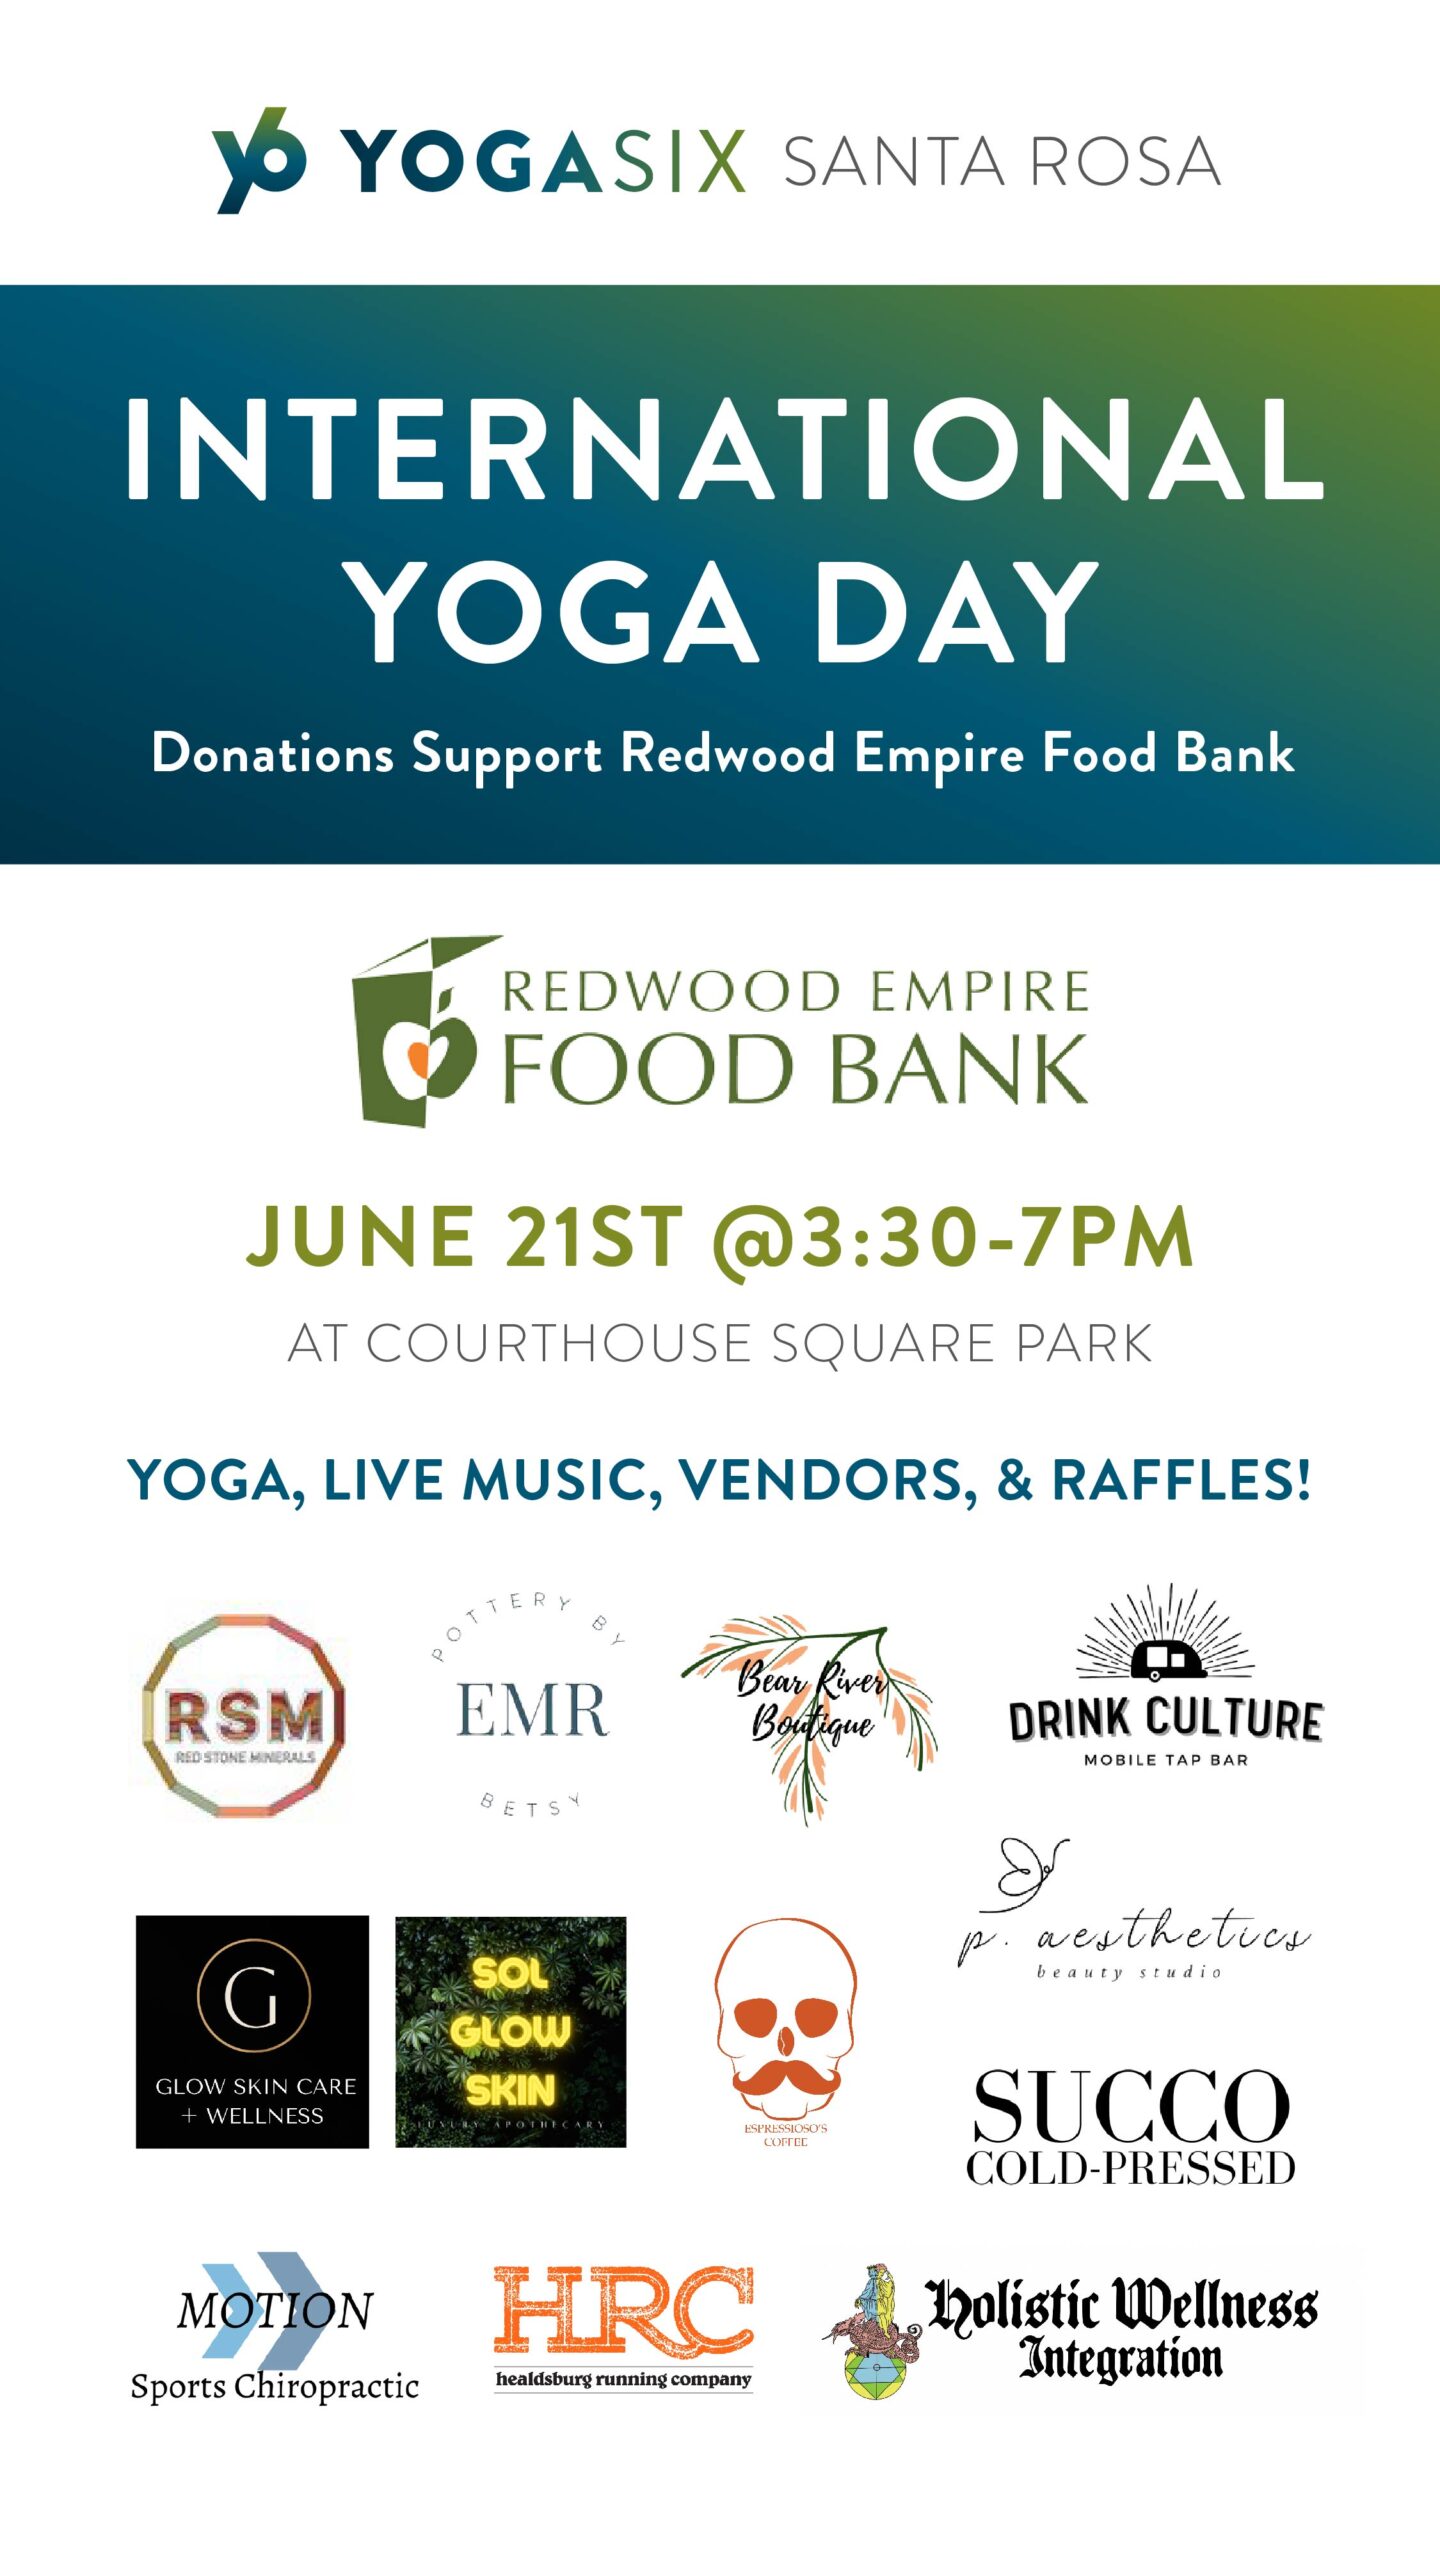 Join us for a fun celebration benefiting Redwood Empire Food Bank. Come celebrate with shopping, food, beverages 🎉 and an all levels yoga class🧘🏼‍♂️ with live music and over 15 amazing raffle prizes including 6 months of unlimited yoga ($1,076 value) from YogaSix Santa Rosa. Donating automatically enters you in the raffle! See Yoga Six Santa Rosa for more details.